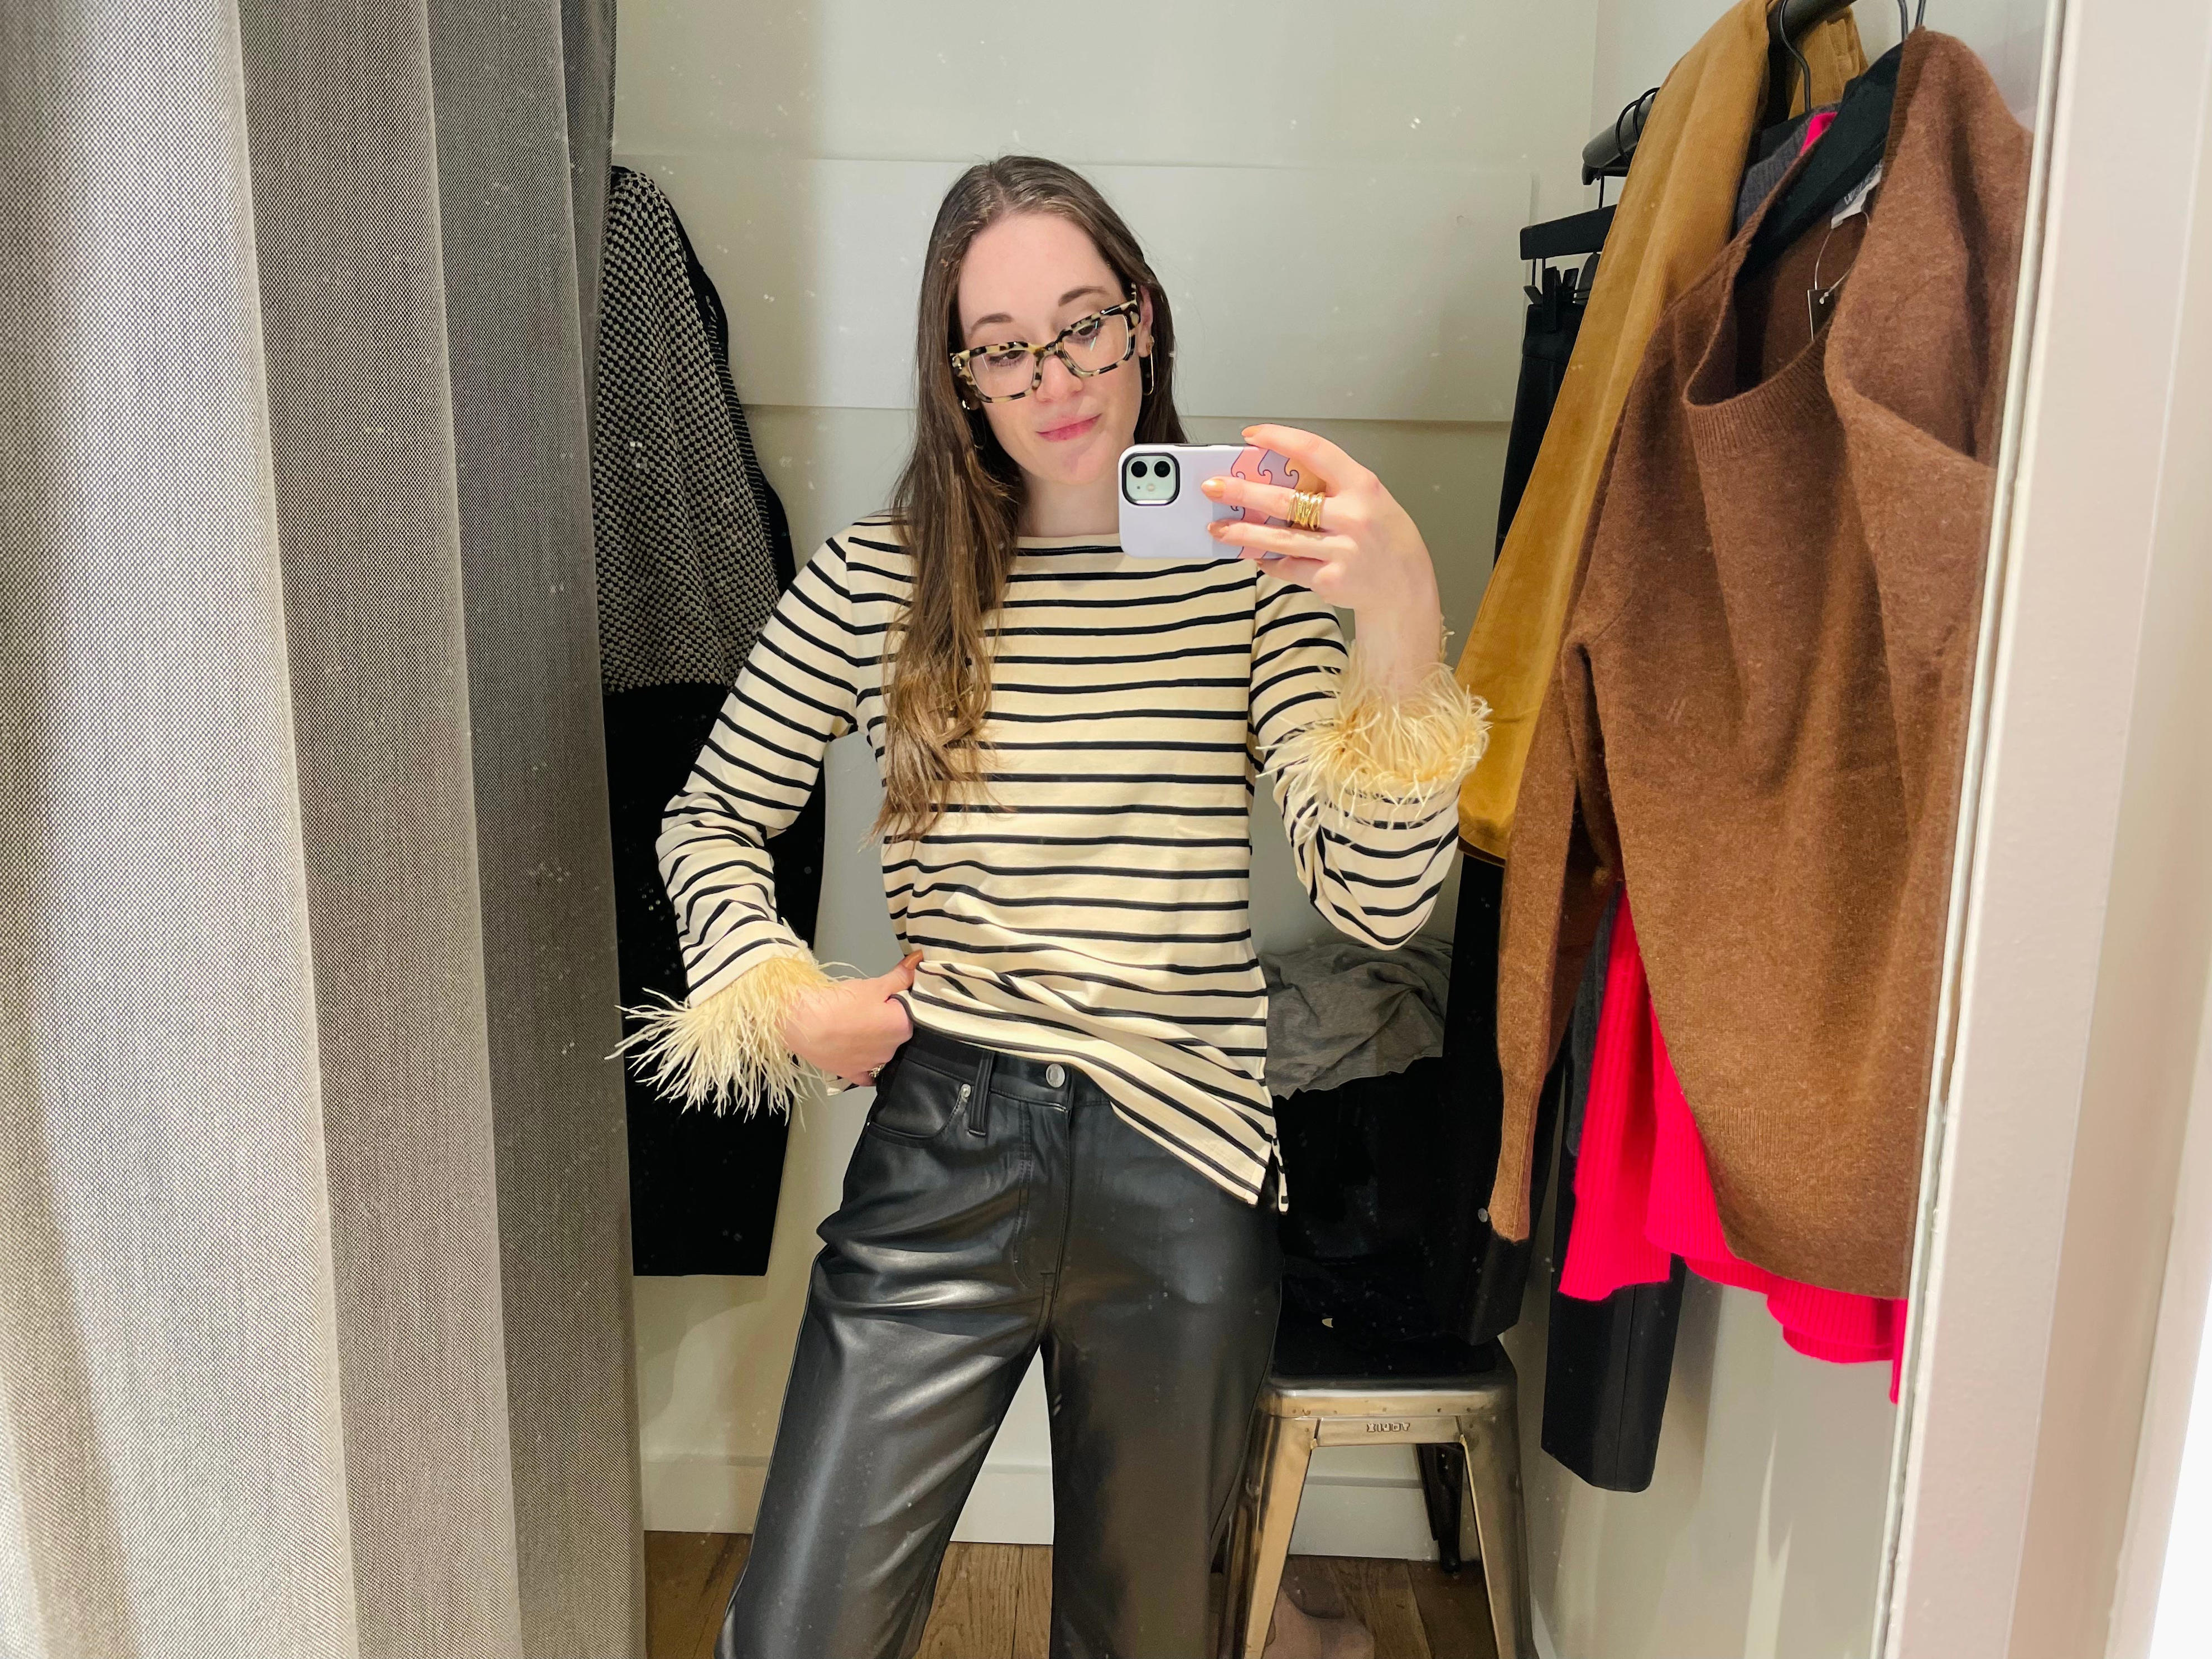 <p>I couldn't decide which pair of pants I liked best. They fit slightly differently, but both felt comfortable and were flattering.</p><p>I tried a shirt with removable feather cuffs for fun — stripes aren't really my thing, but I actually didn't hate it.</p>